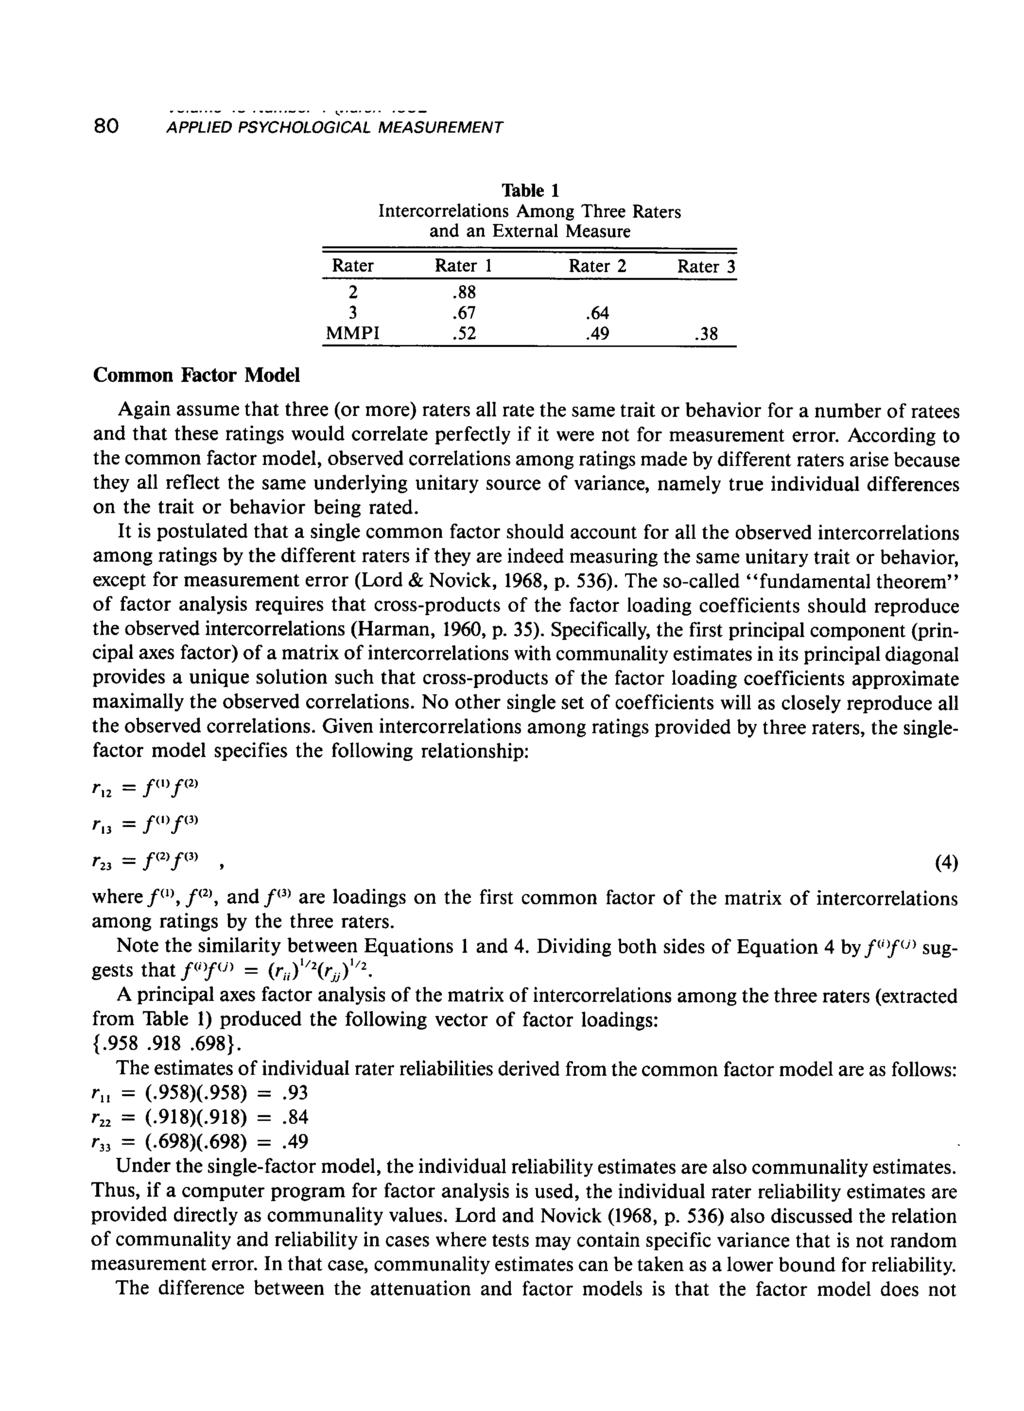 80 Table 1 Intercorrelations Among Three Raters and an External Measure Common Factor Model Again assume that three (or more) raters all rate the same trait or behavior for a number of ratees and